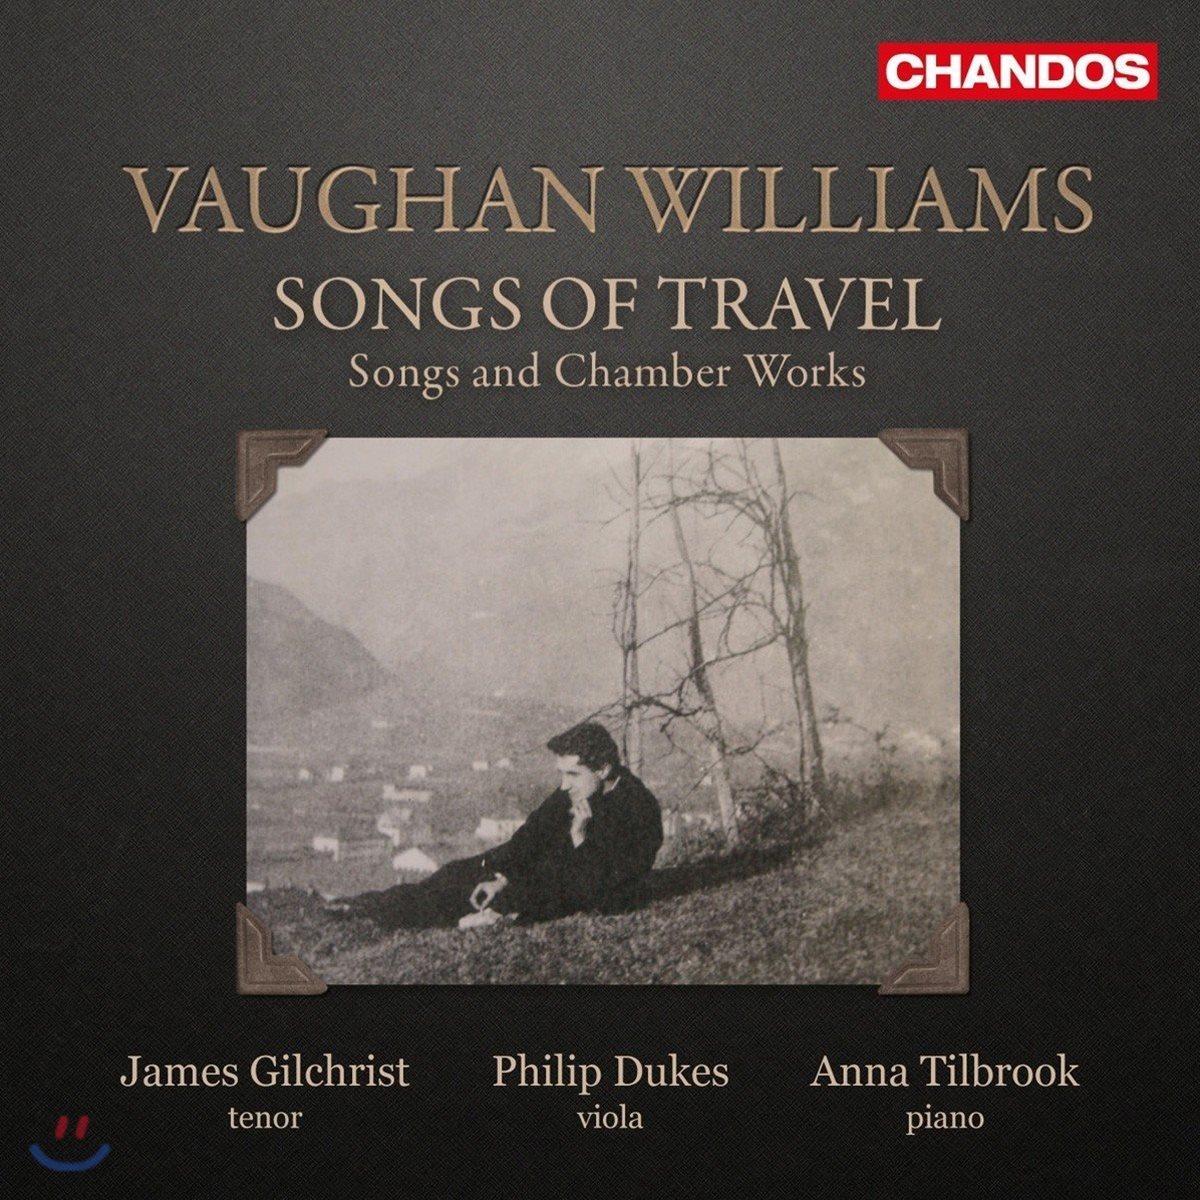 James Gilchrist 본 윌리엄스: 여행의 노래 - 가곡과 실내악 작품집 (Vaughan Williams: Songs Of Travel - Songs and Chamber Works)